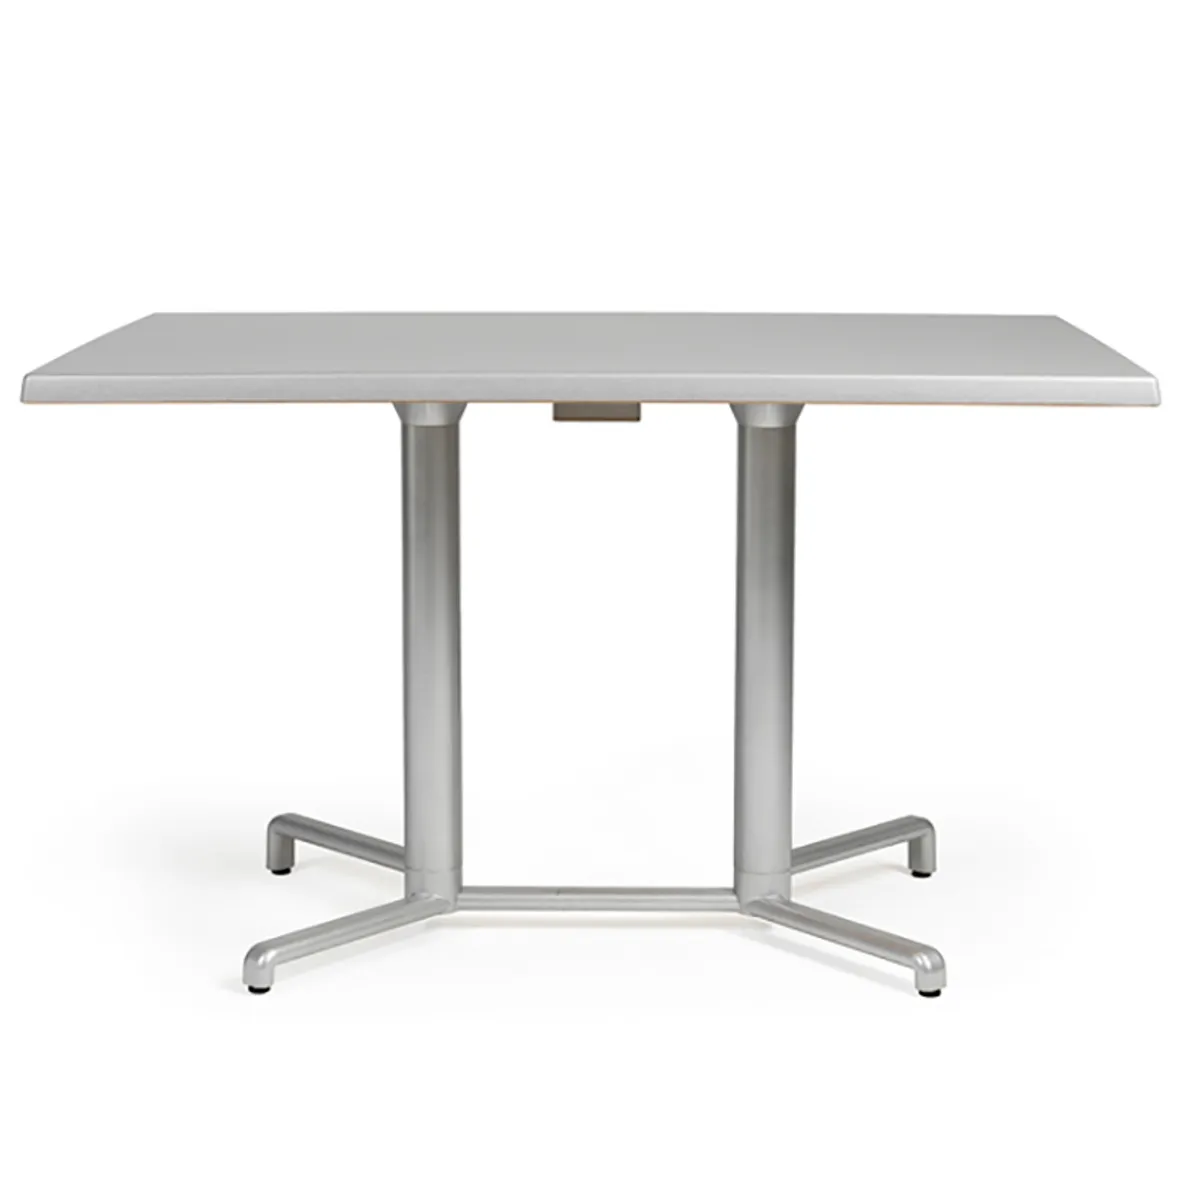 Shield Flip Top Table Base For Outdoors Double Silver 0089